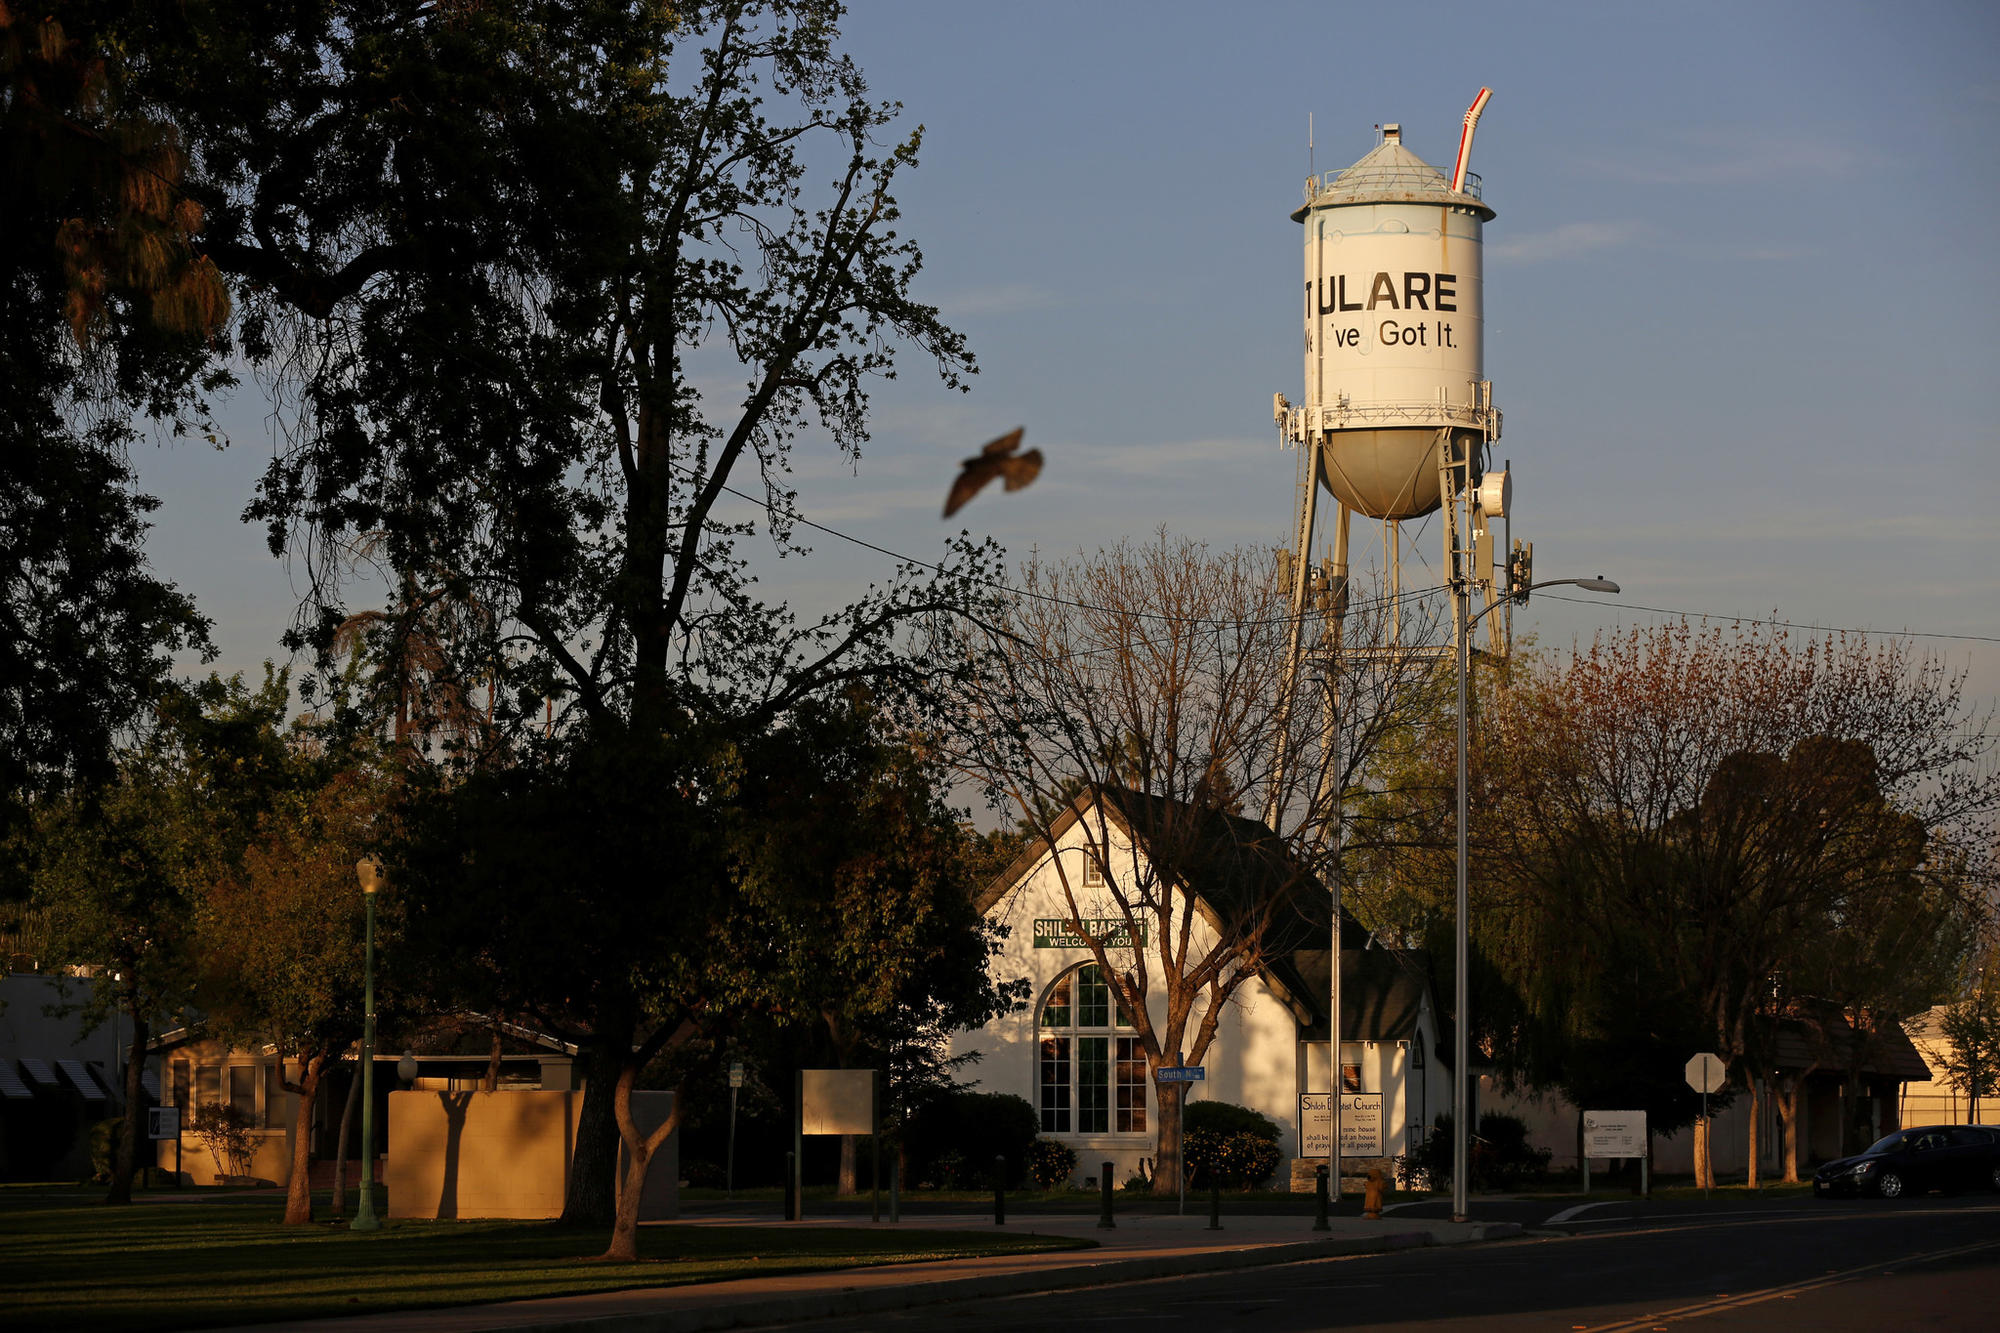 The farming community of Tulare, southeast of Fresno, has sustained the Nunes family for generations.